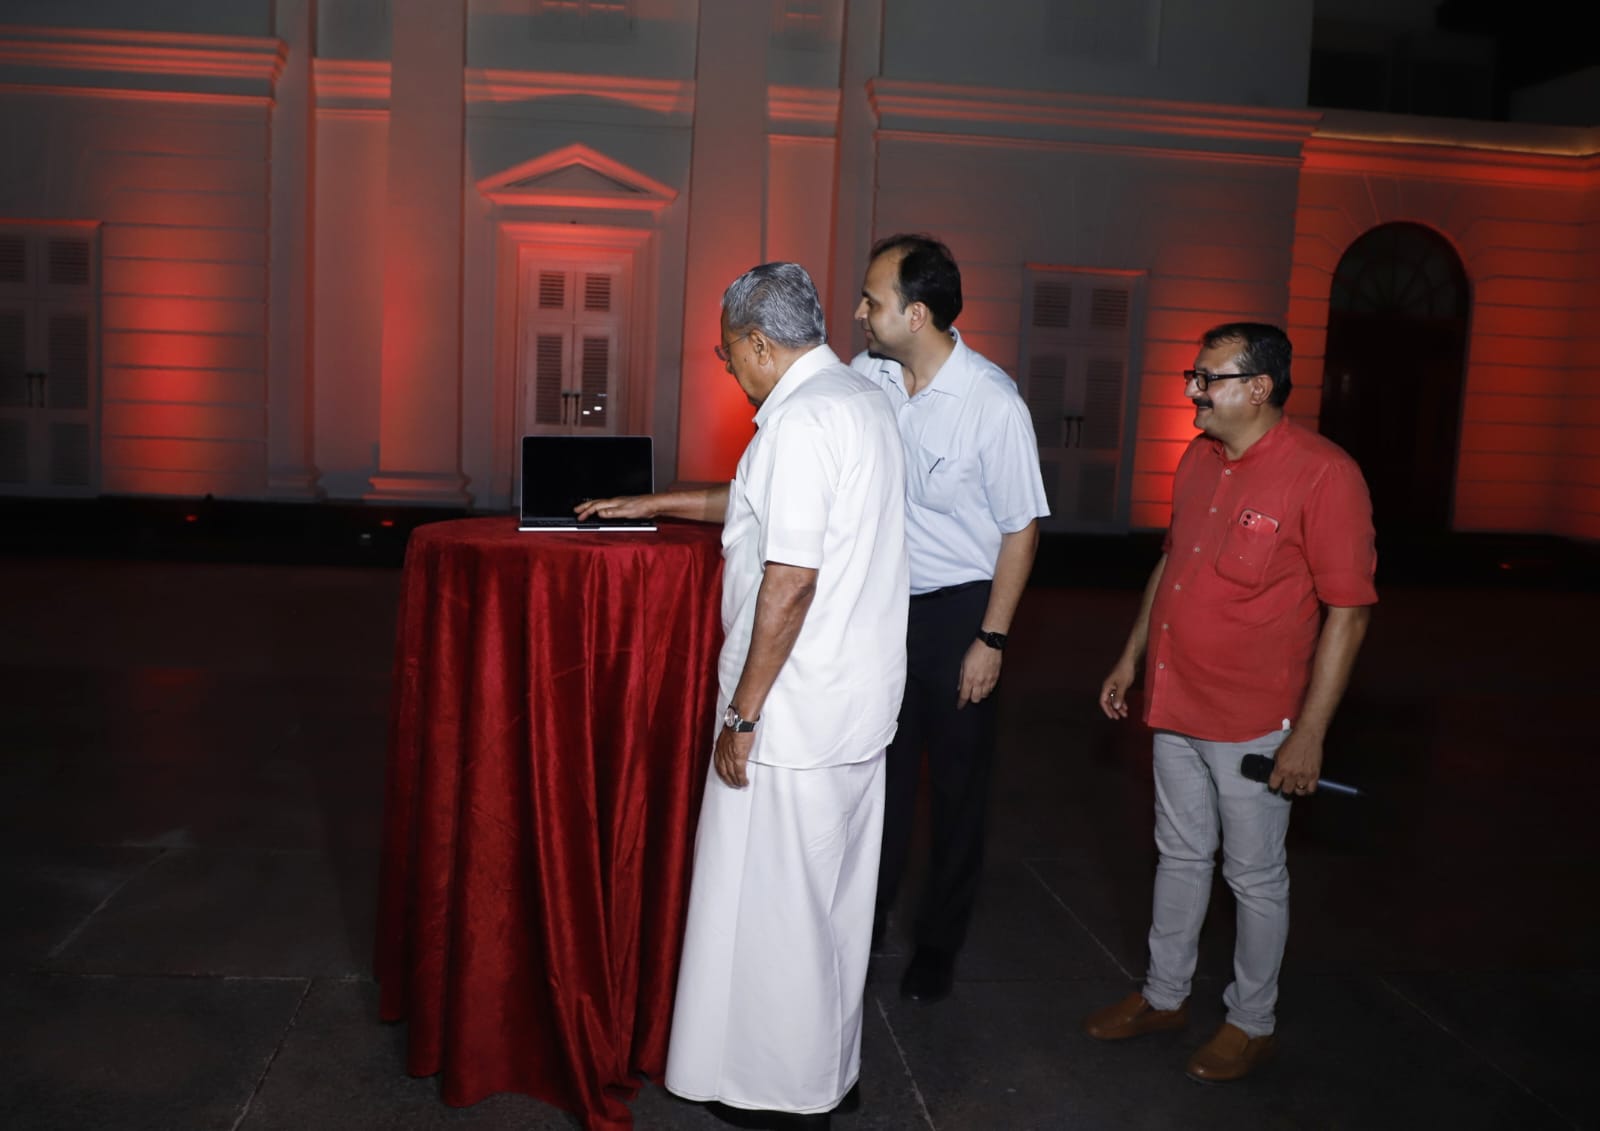 Kerala CM inaugurates Light and Sound Show in Travancore Palace